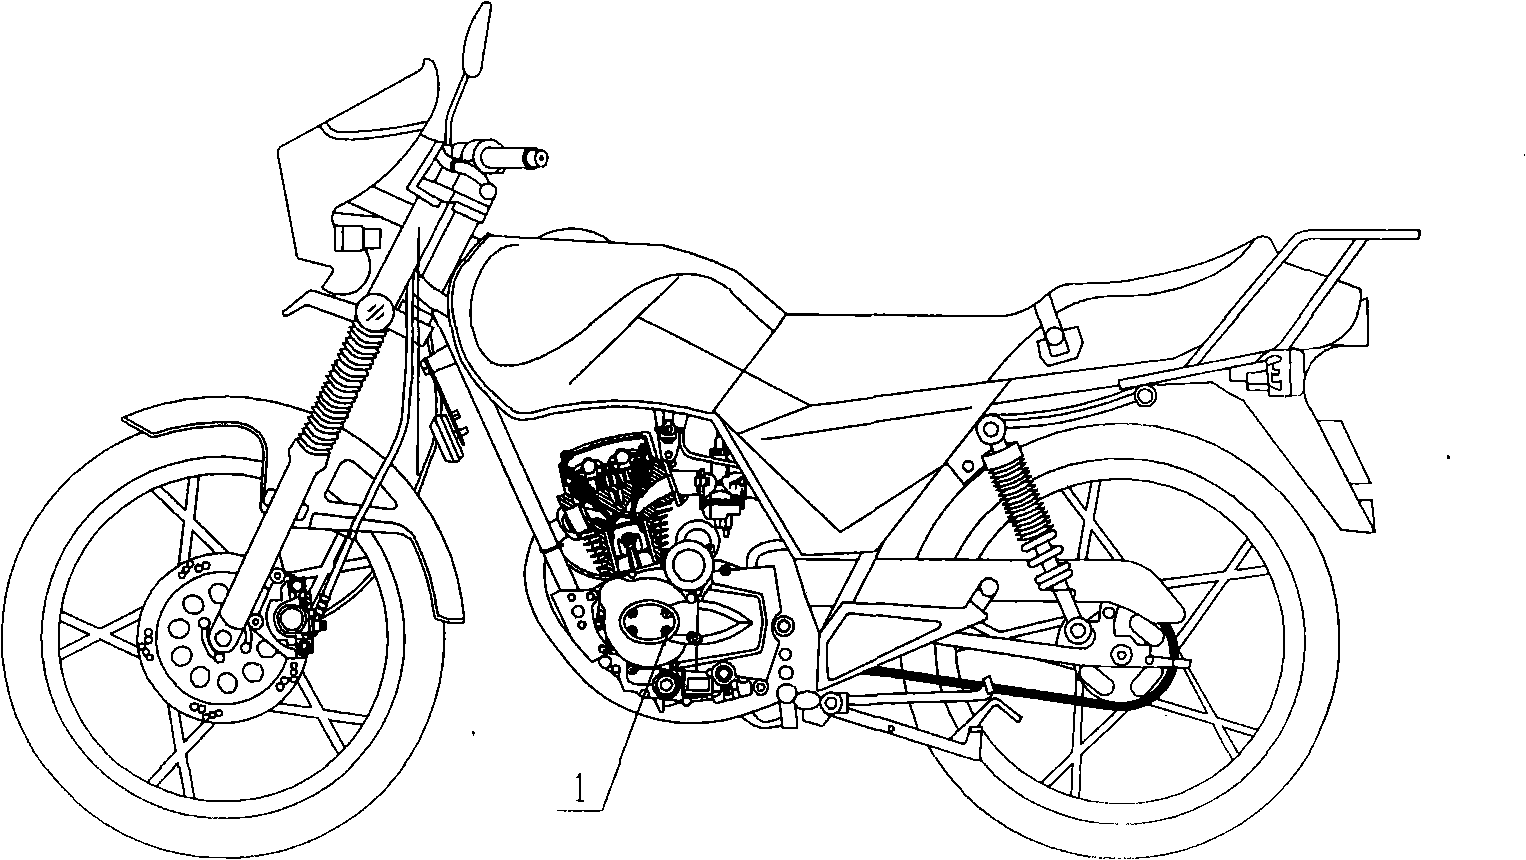 Simple oil cooling system of motorcycle engine